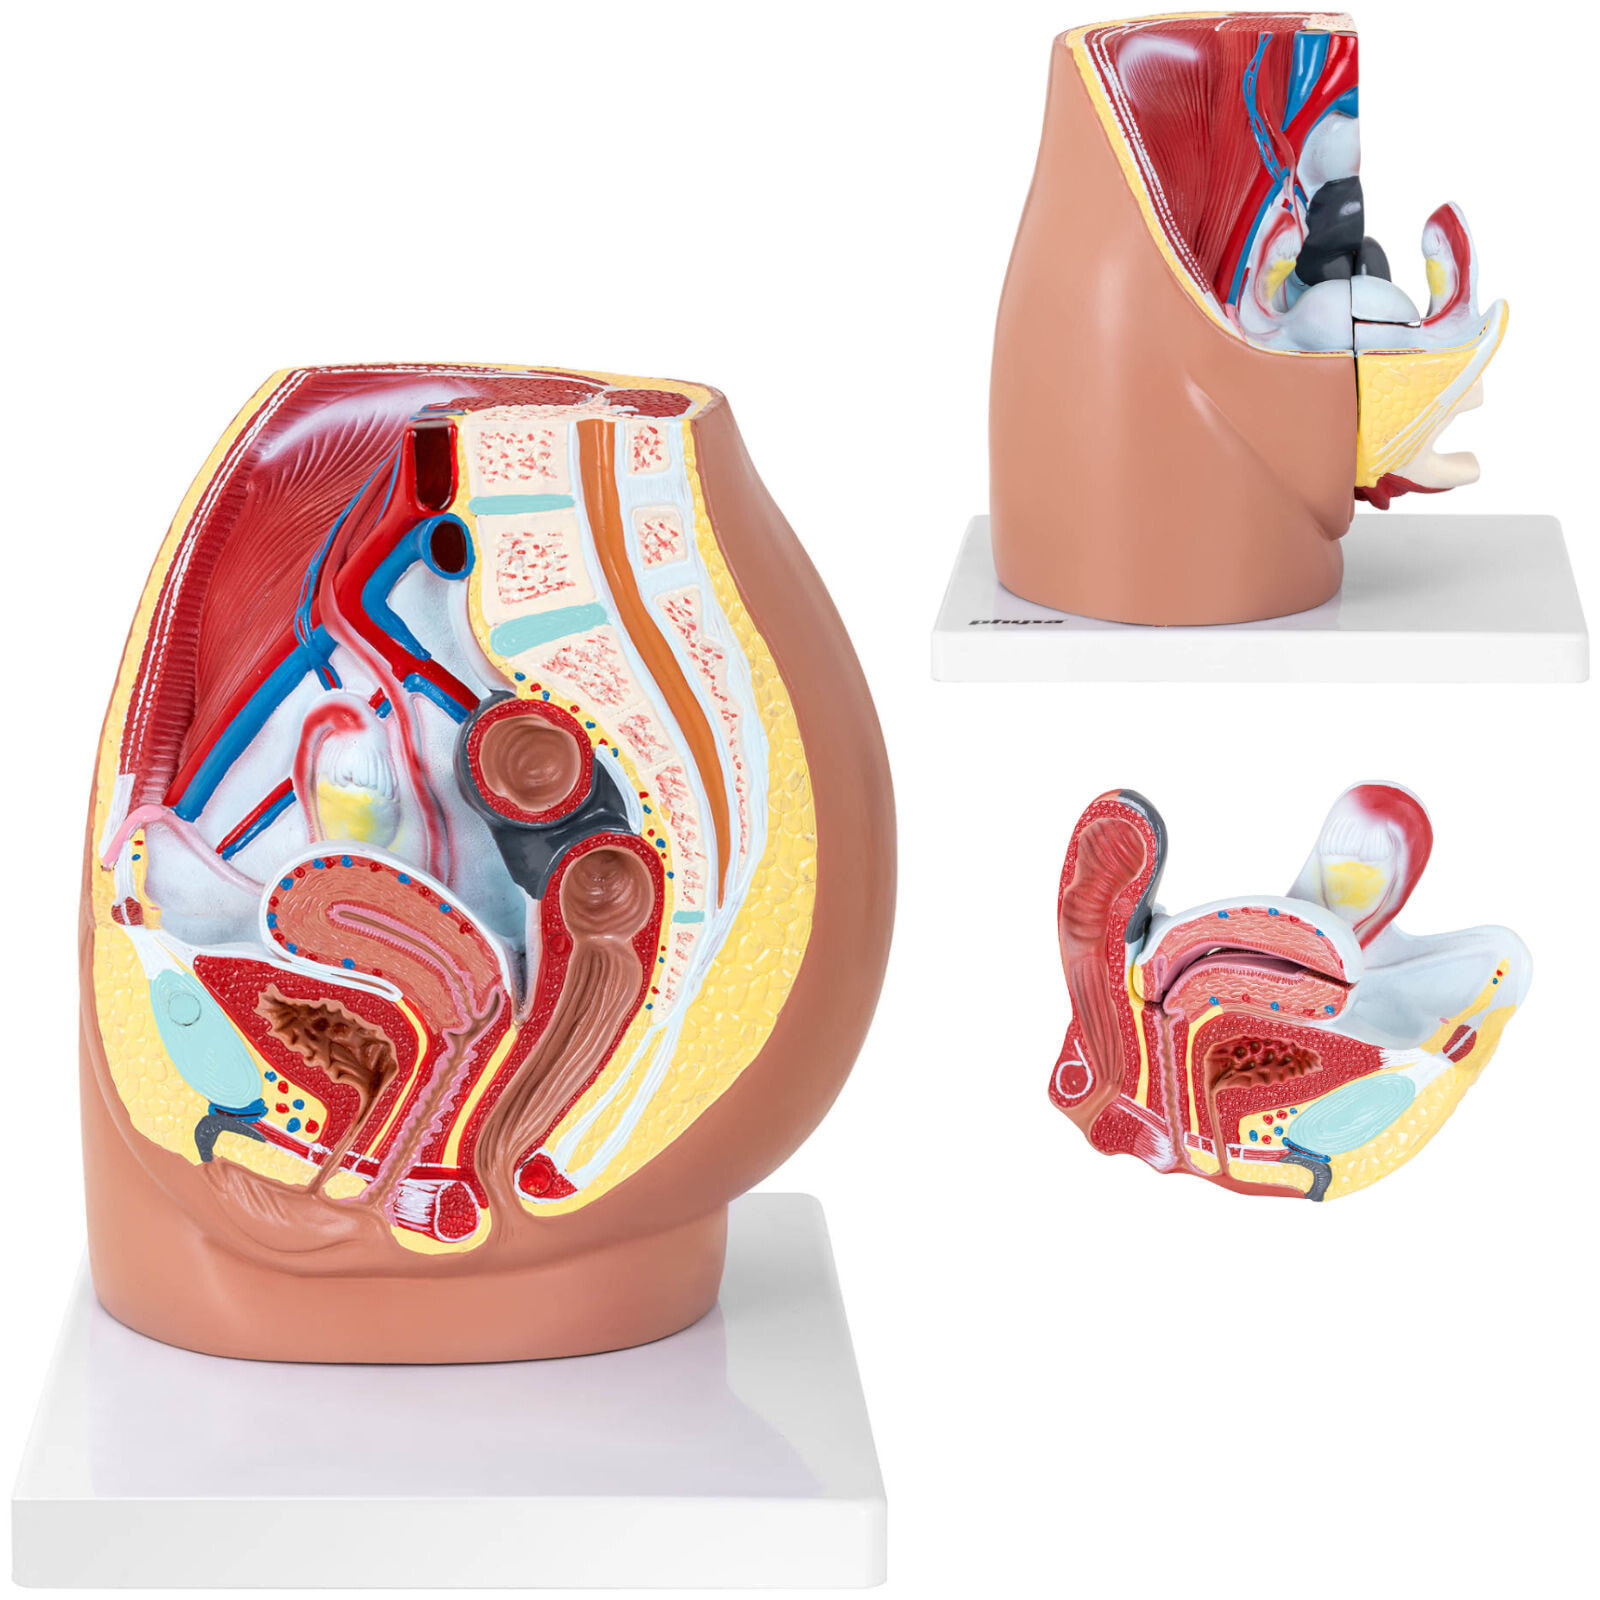 3D 1: 1 scale anatomical model of the female pelvis